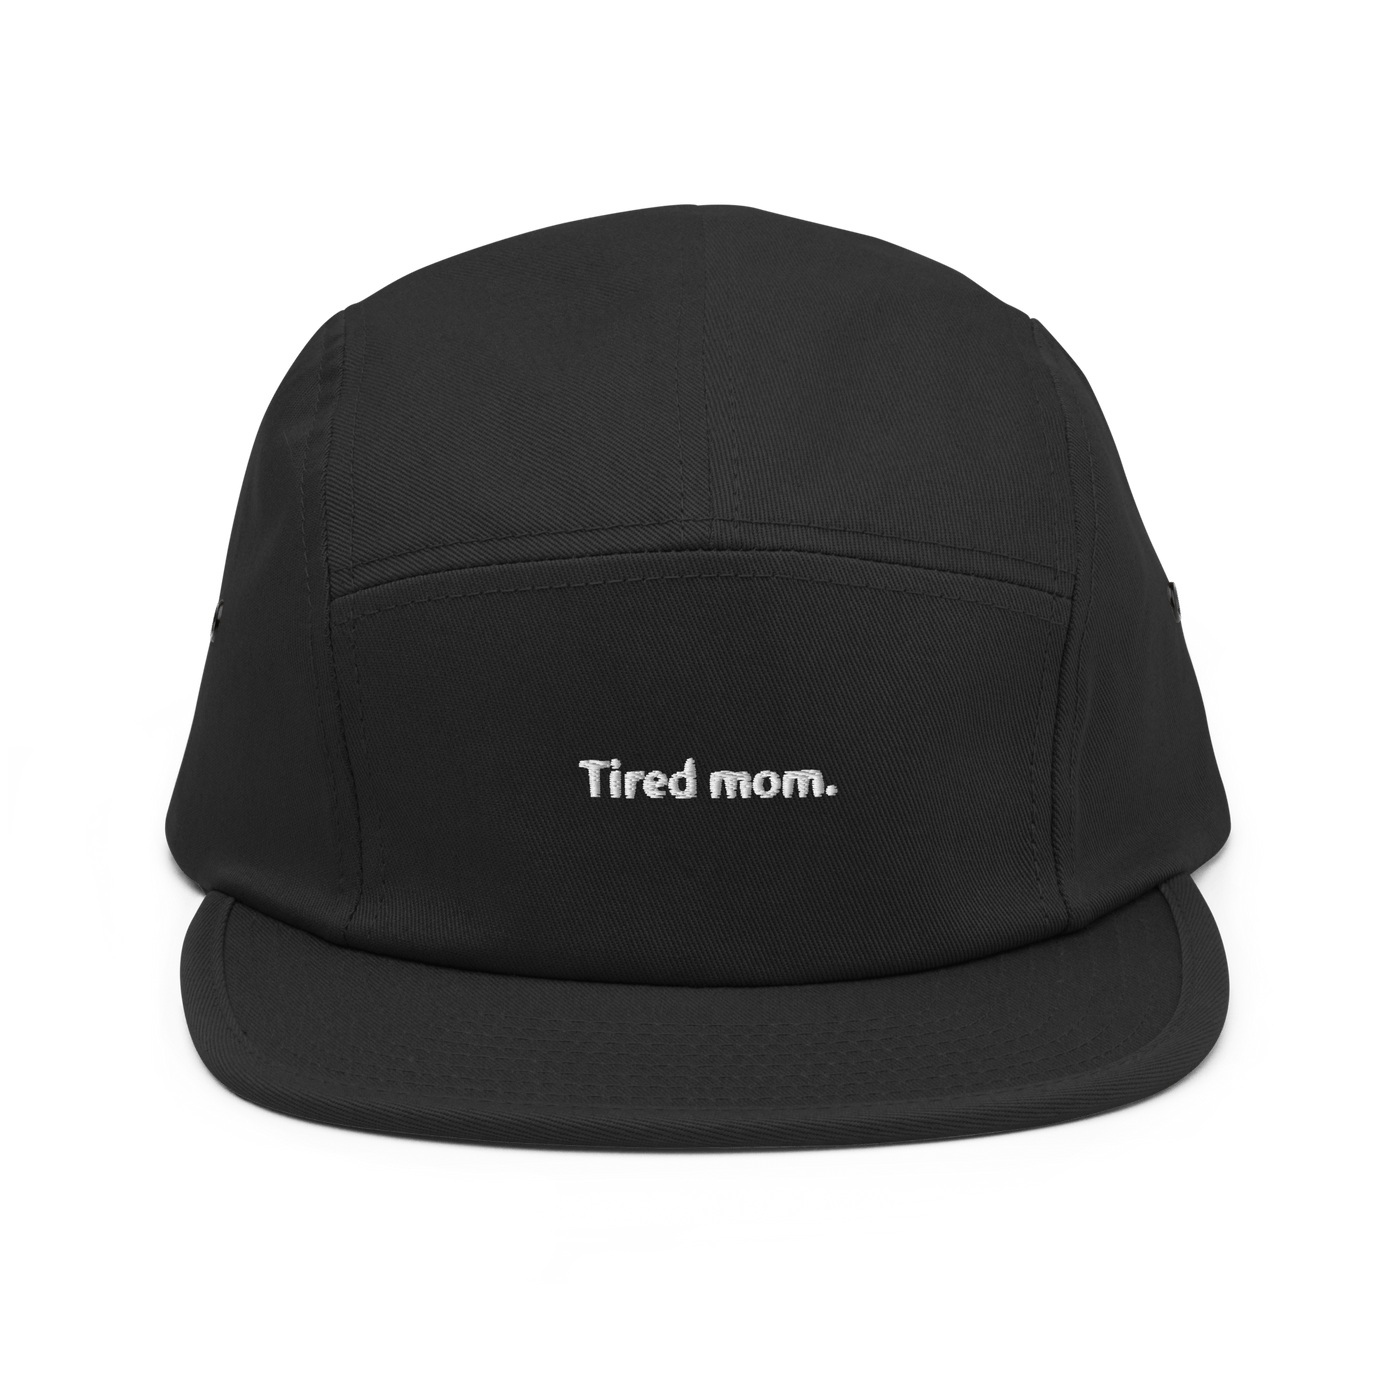 Tired Mom Five Panel Hat - Black - - Just Another Cap Store